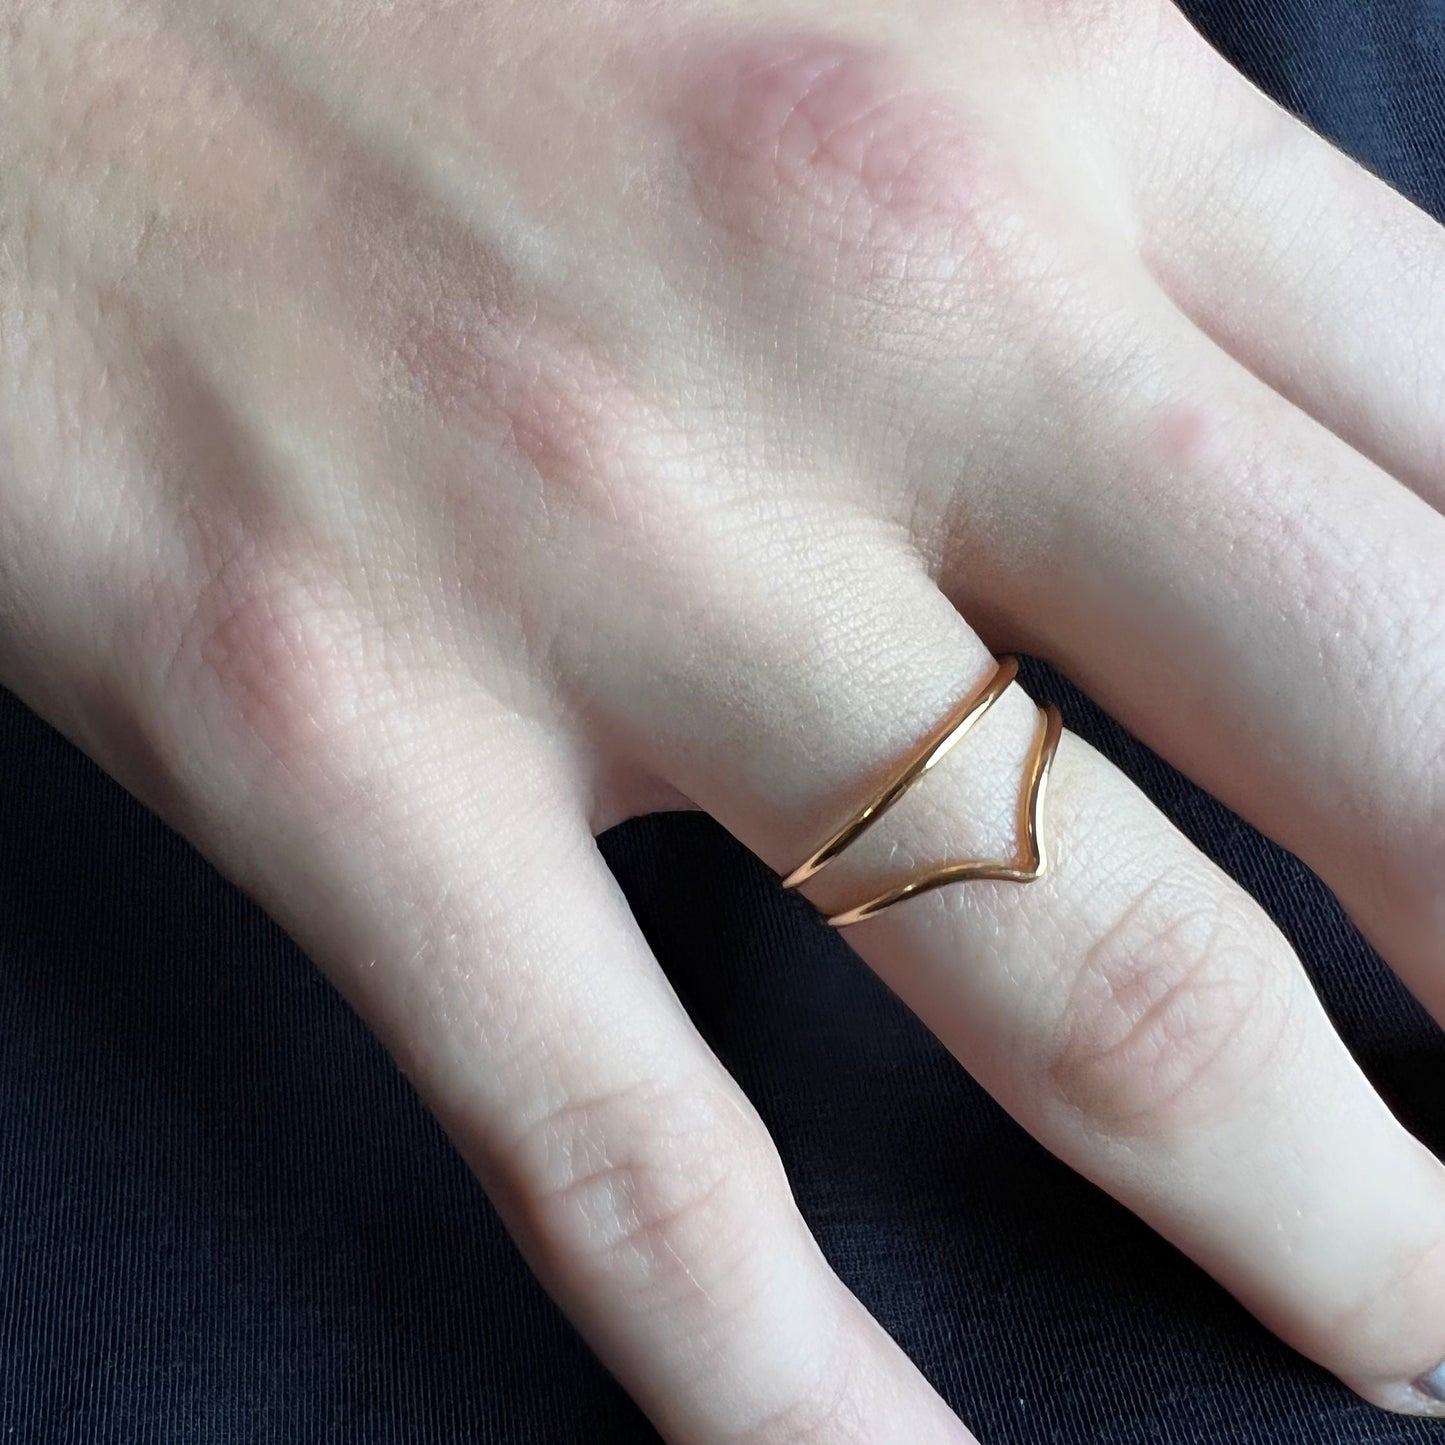 Dainty V Stacking Ring, Delicate Chevron Ring,Simple Minimal Ring,Everyday Ring,Thin Gold Ring,Minimalist Ring,Stacking Ring, Christmas Gift